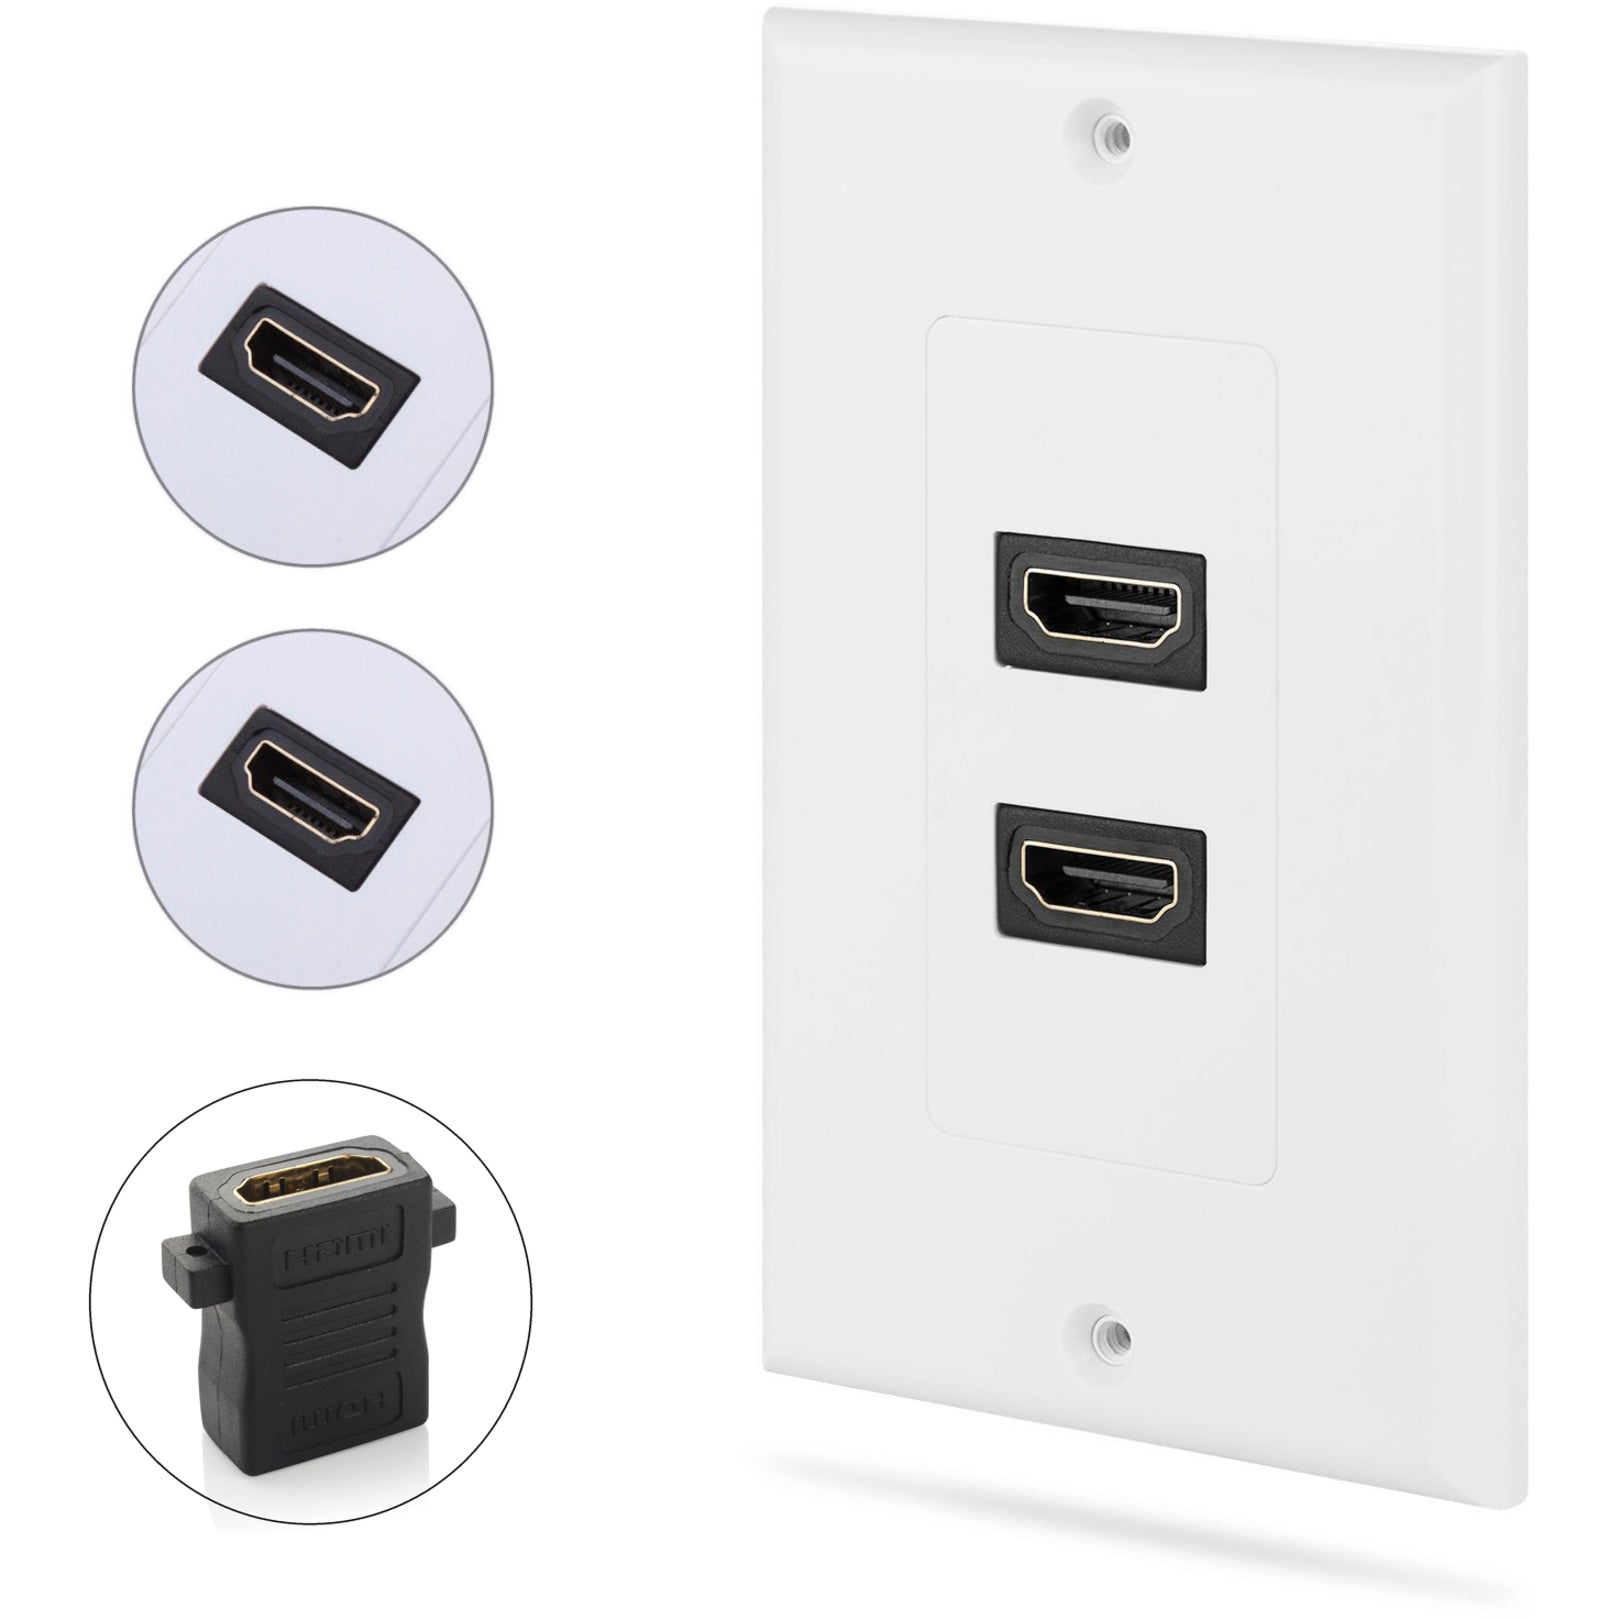 4XEM 4XWALLHDMI2 2 Port Female HDMI Wall Plate, Designed for Secure and Easy HDMI Connections